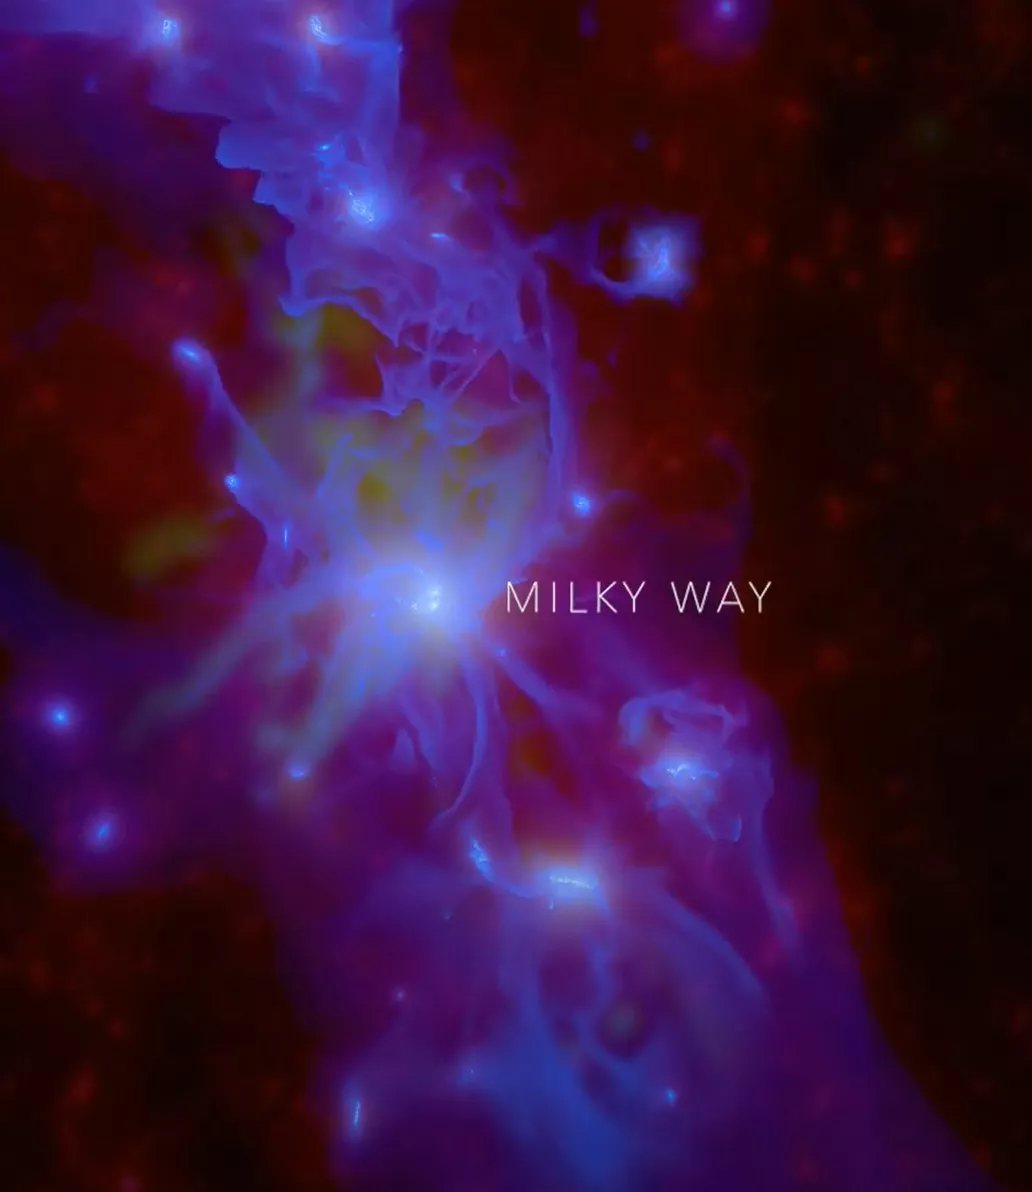 Simulated data showing the formation of the Milky Way.